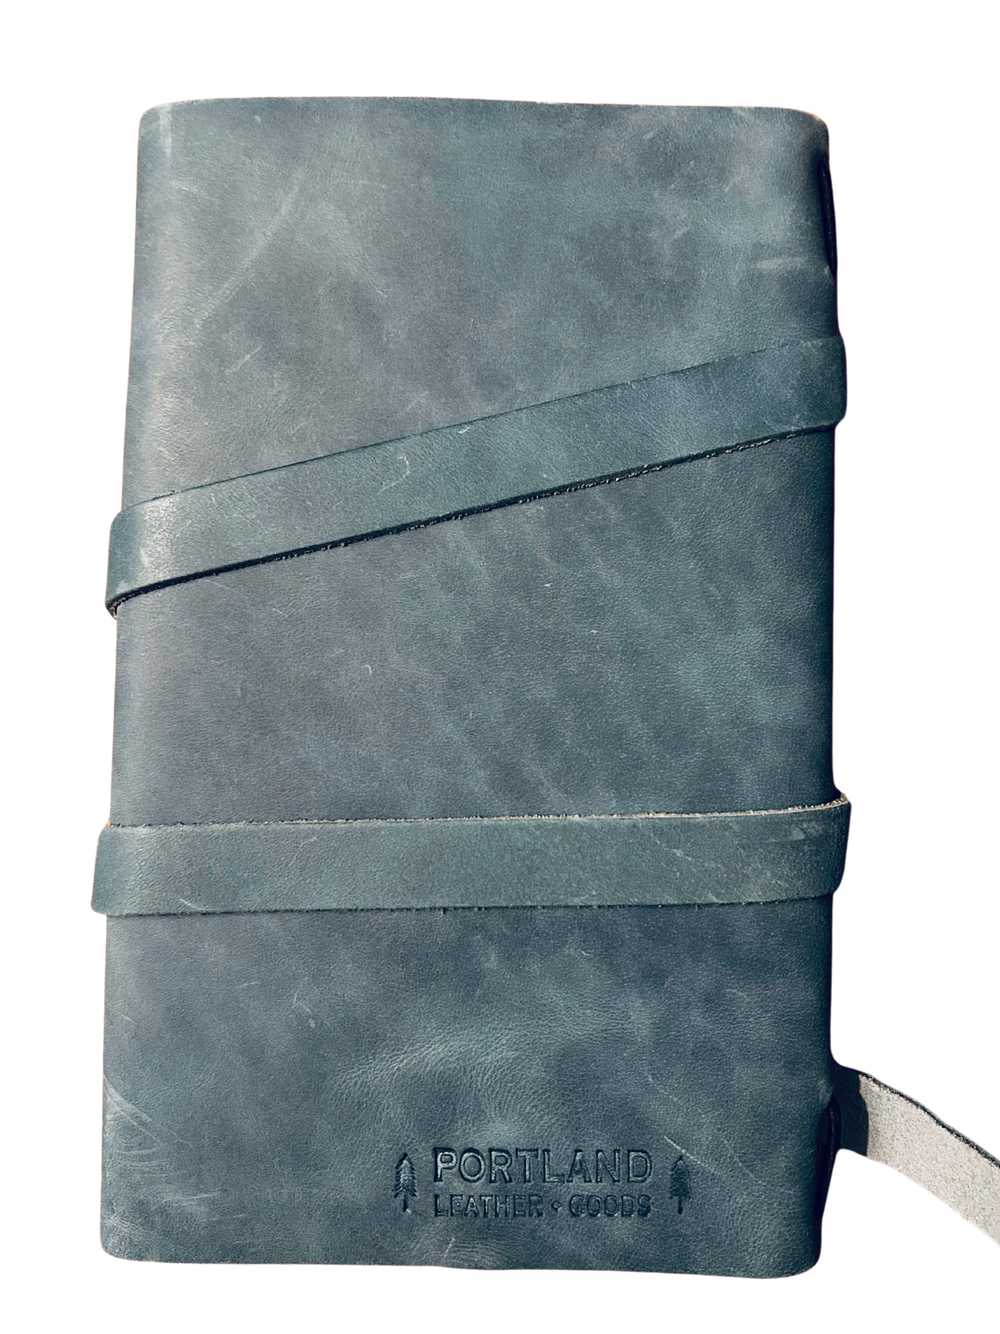 Portland Leather Leather Wrap Journal - image 1